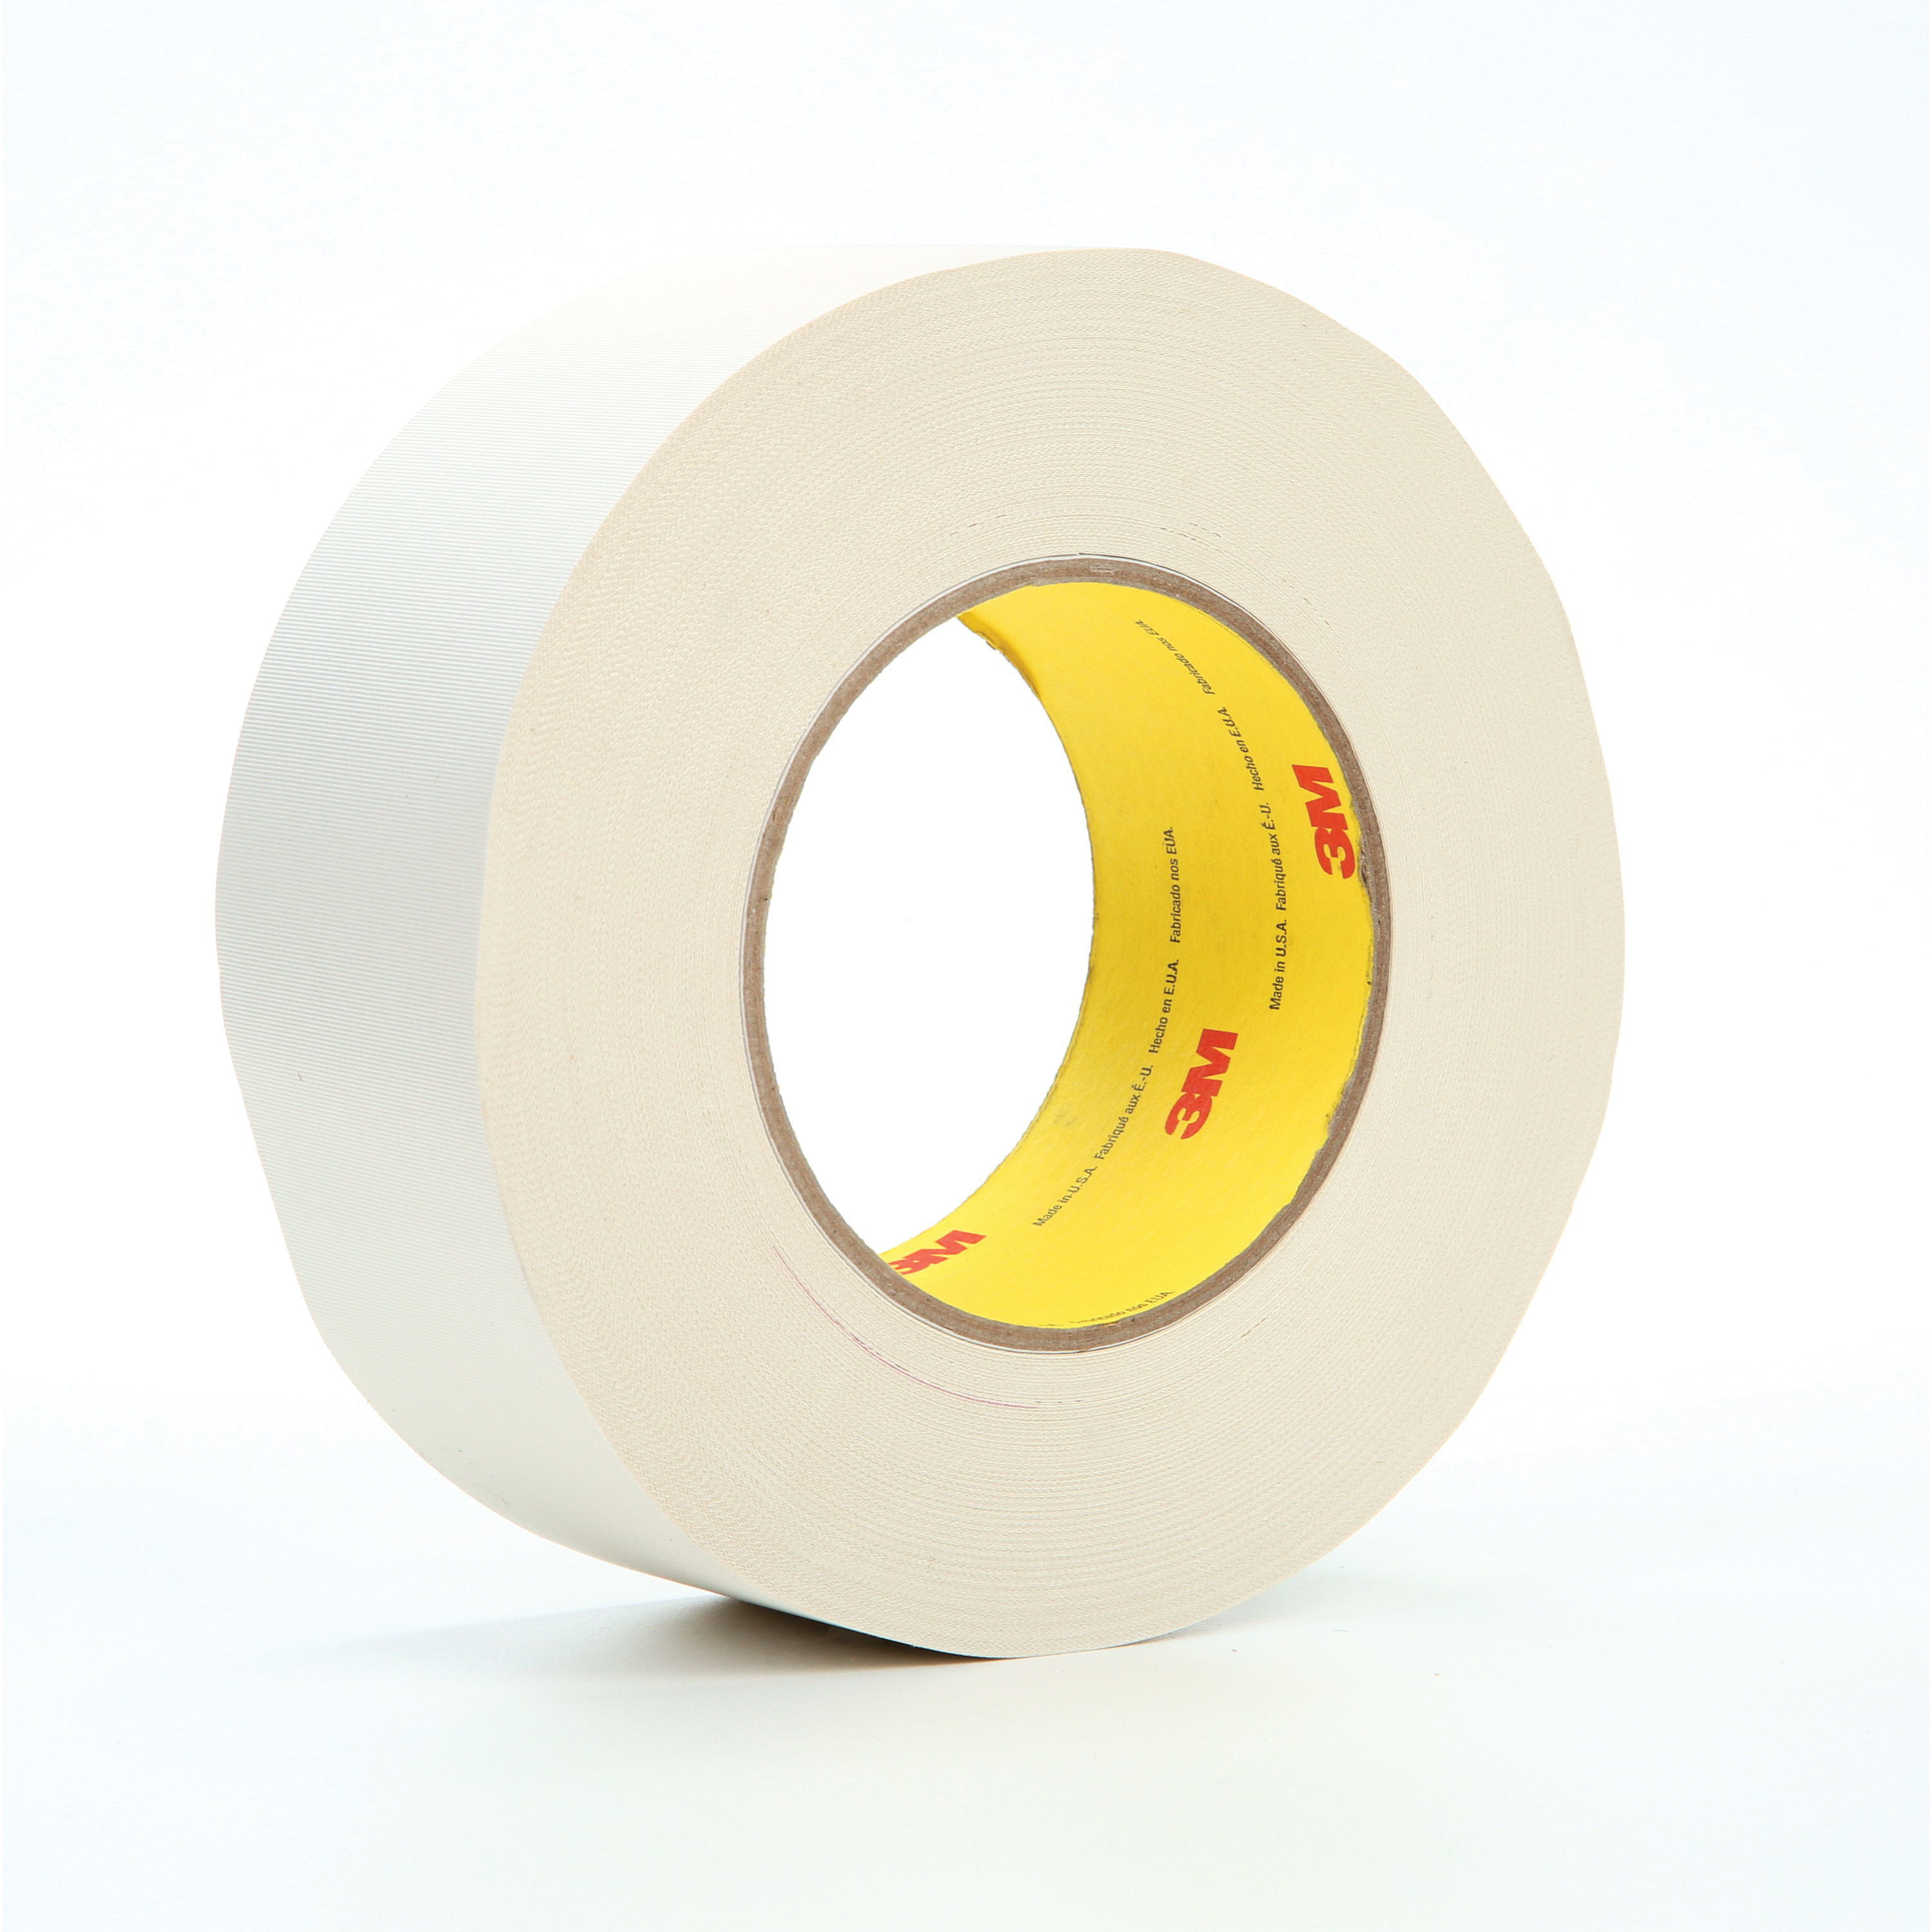 3M™ 021200-04277 Cloth Tape, 60 yd L x 2 in W, 8.3 mil THK, Thermoset Rubber Resin Adhesive, Glass Cloth Backing, White